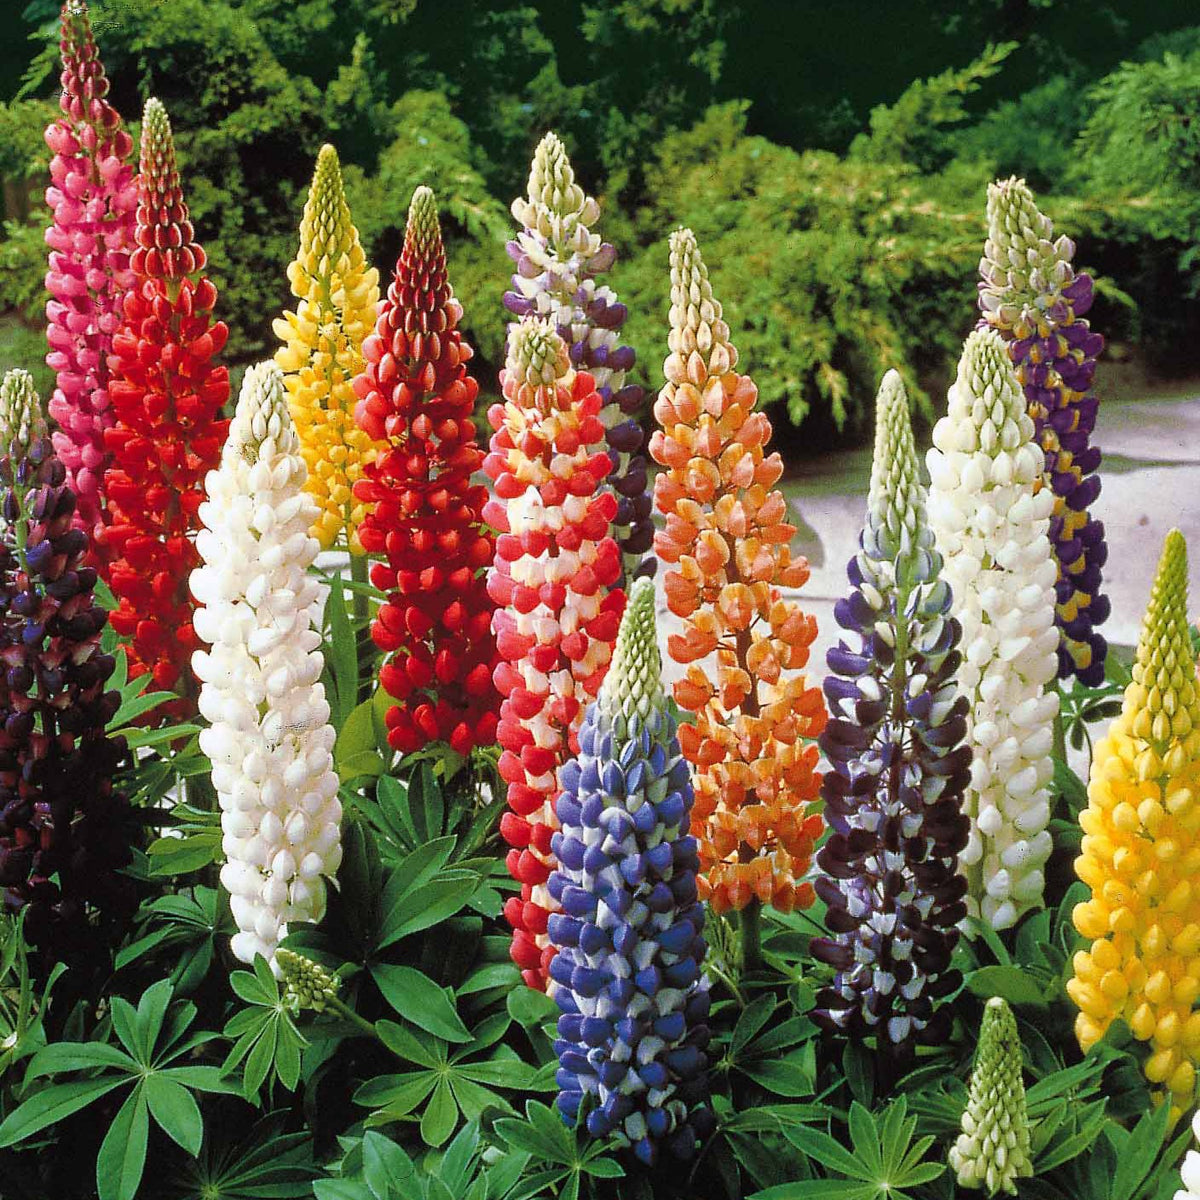 5 Lupin Russell en mélange - Lupinus hybrid russell